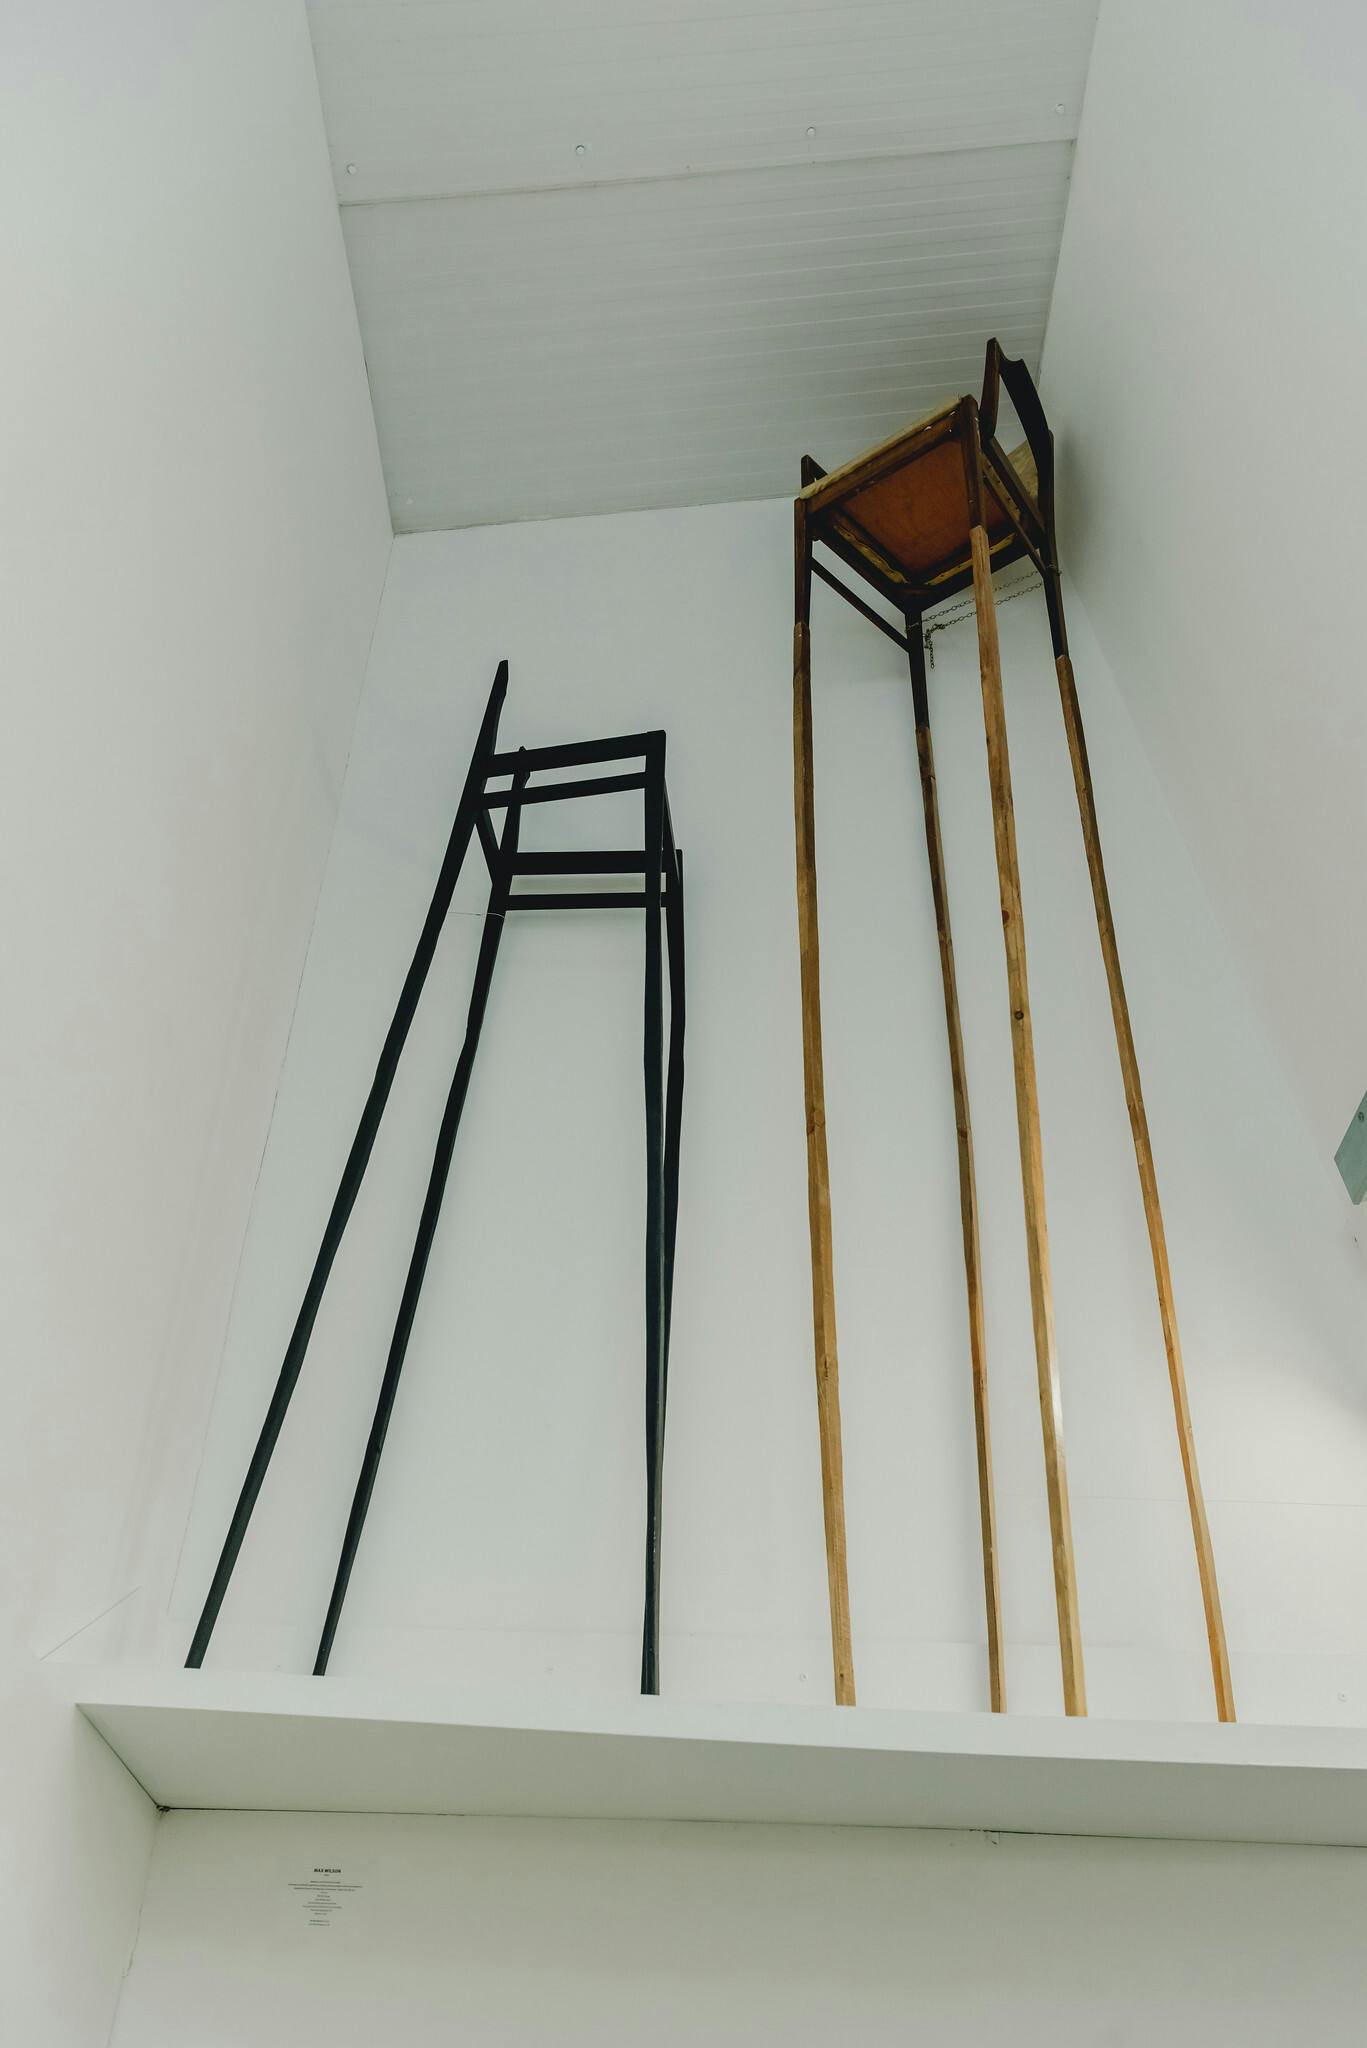 Max Wilsons sculptures show a black chair and a wooden chair with tall five to six foot legs